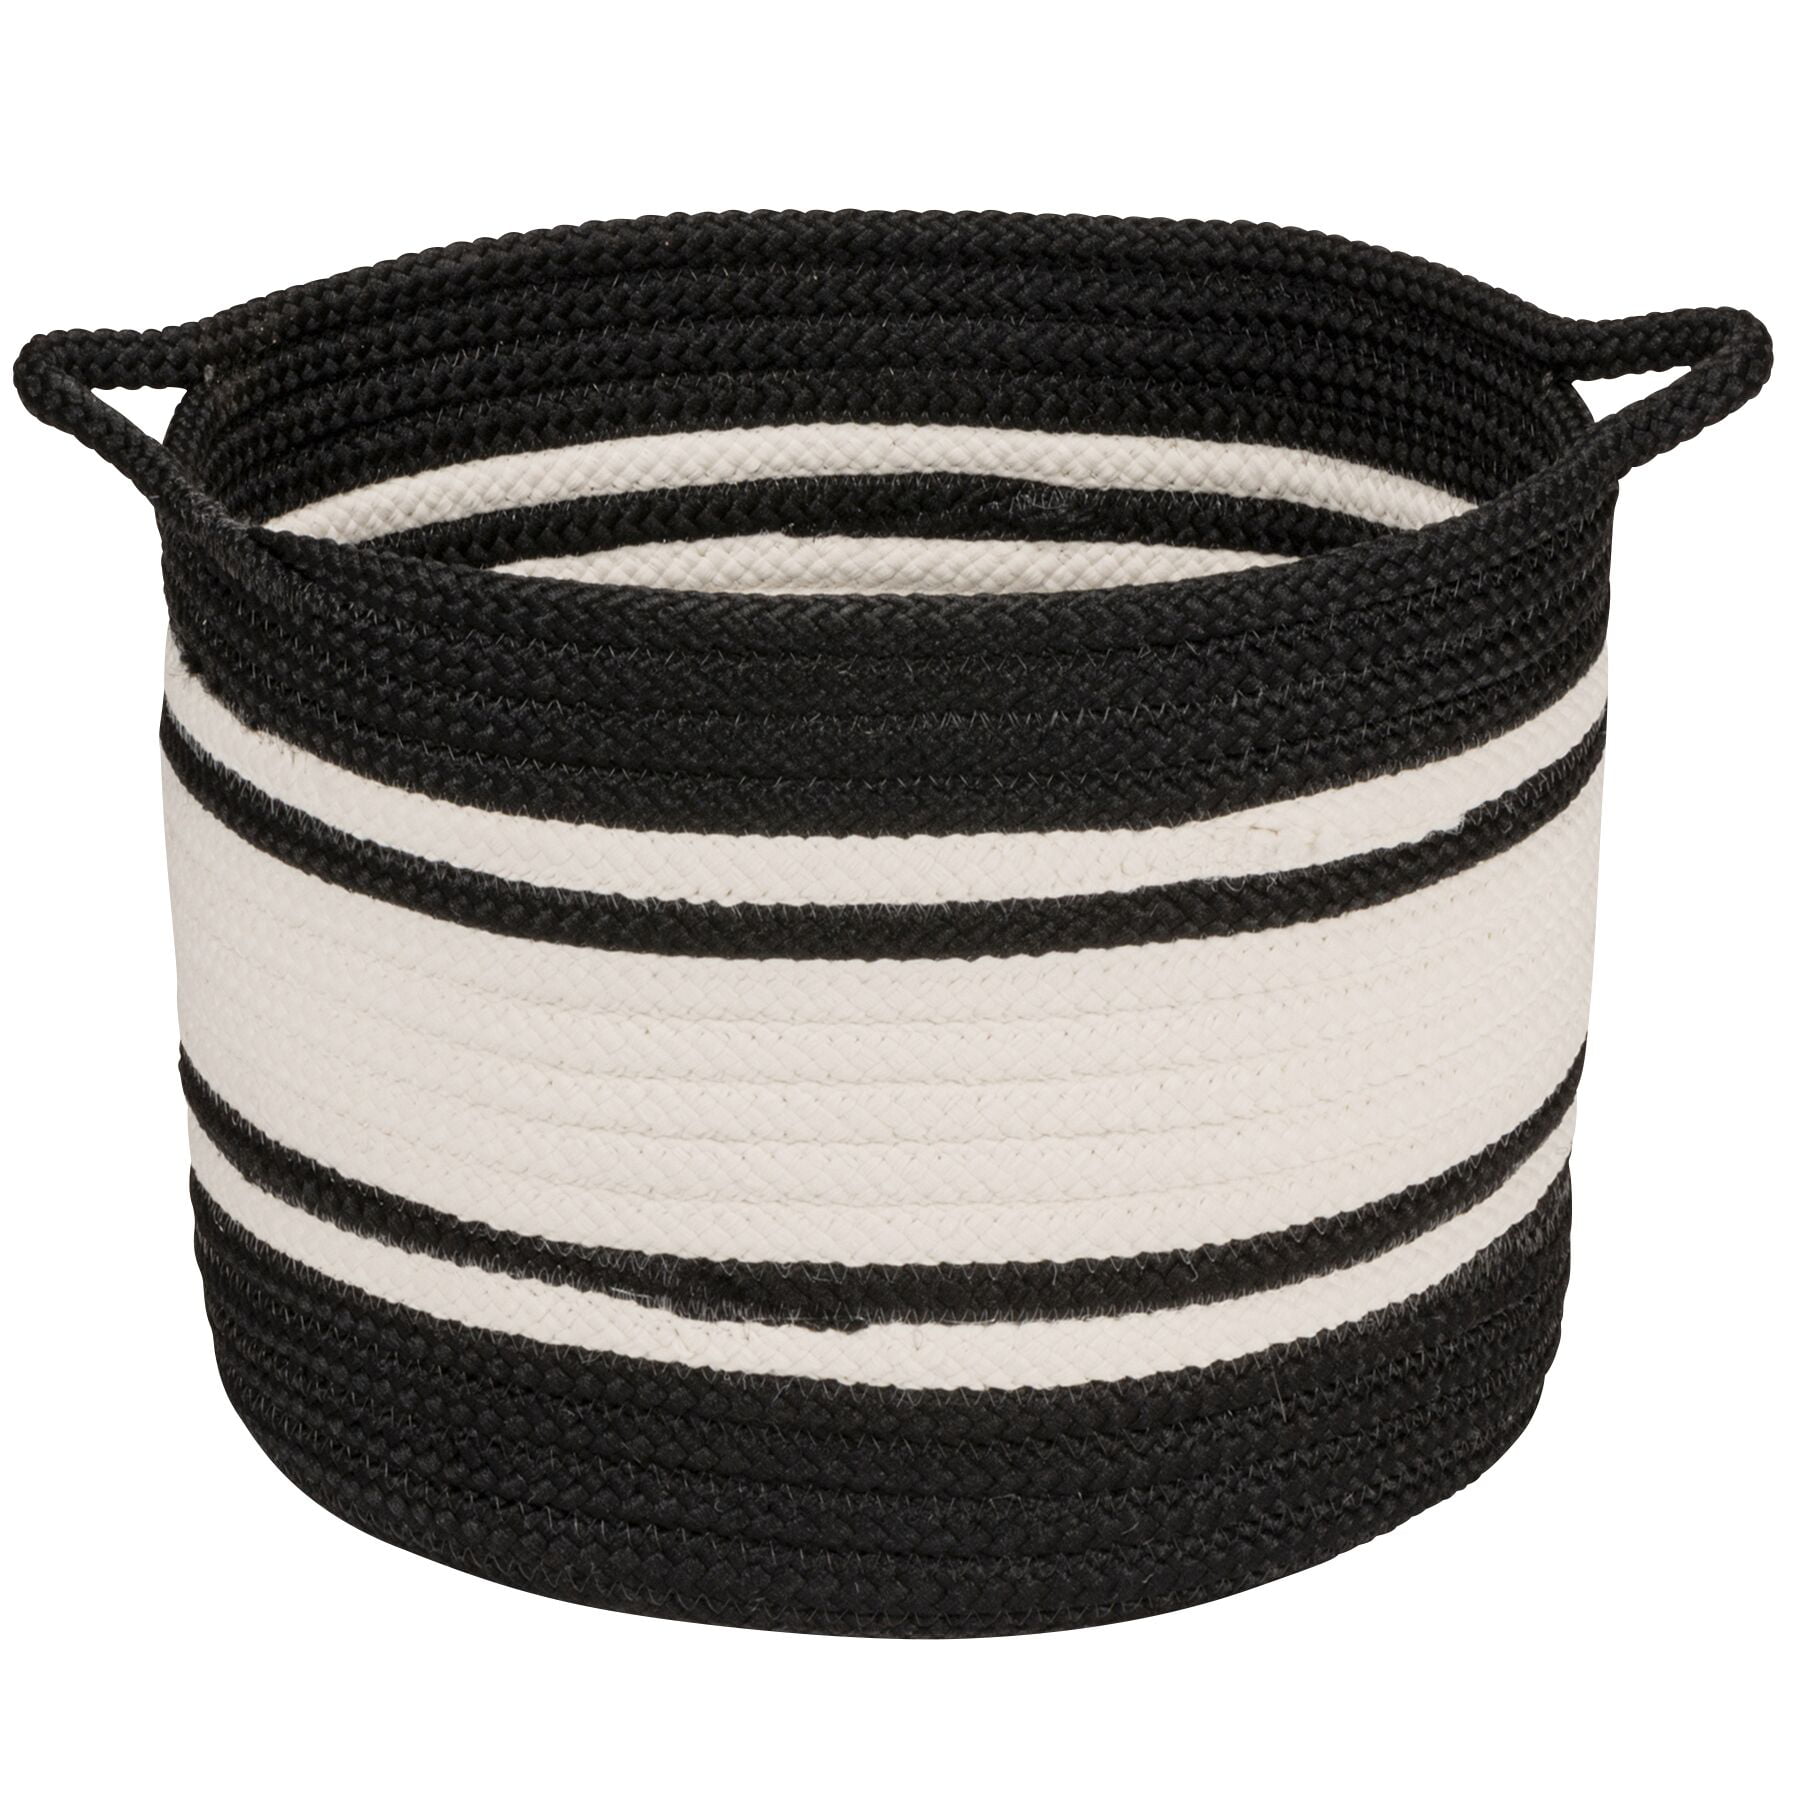 Colonia Mills Bs33 Outland Basket, Black - 20 X 20 X 18 In.